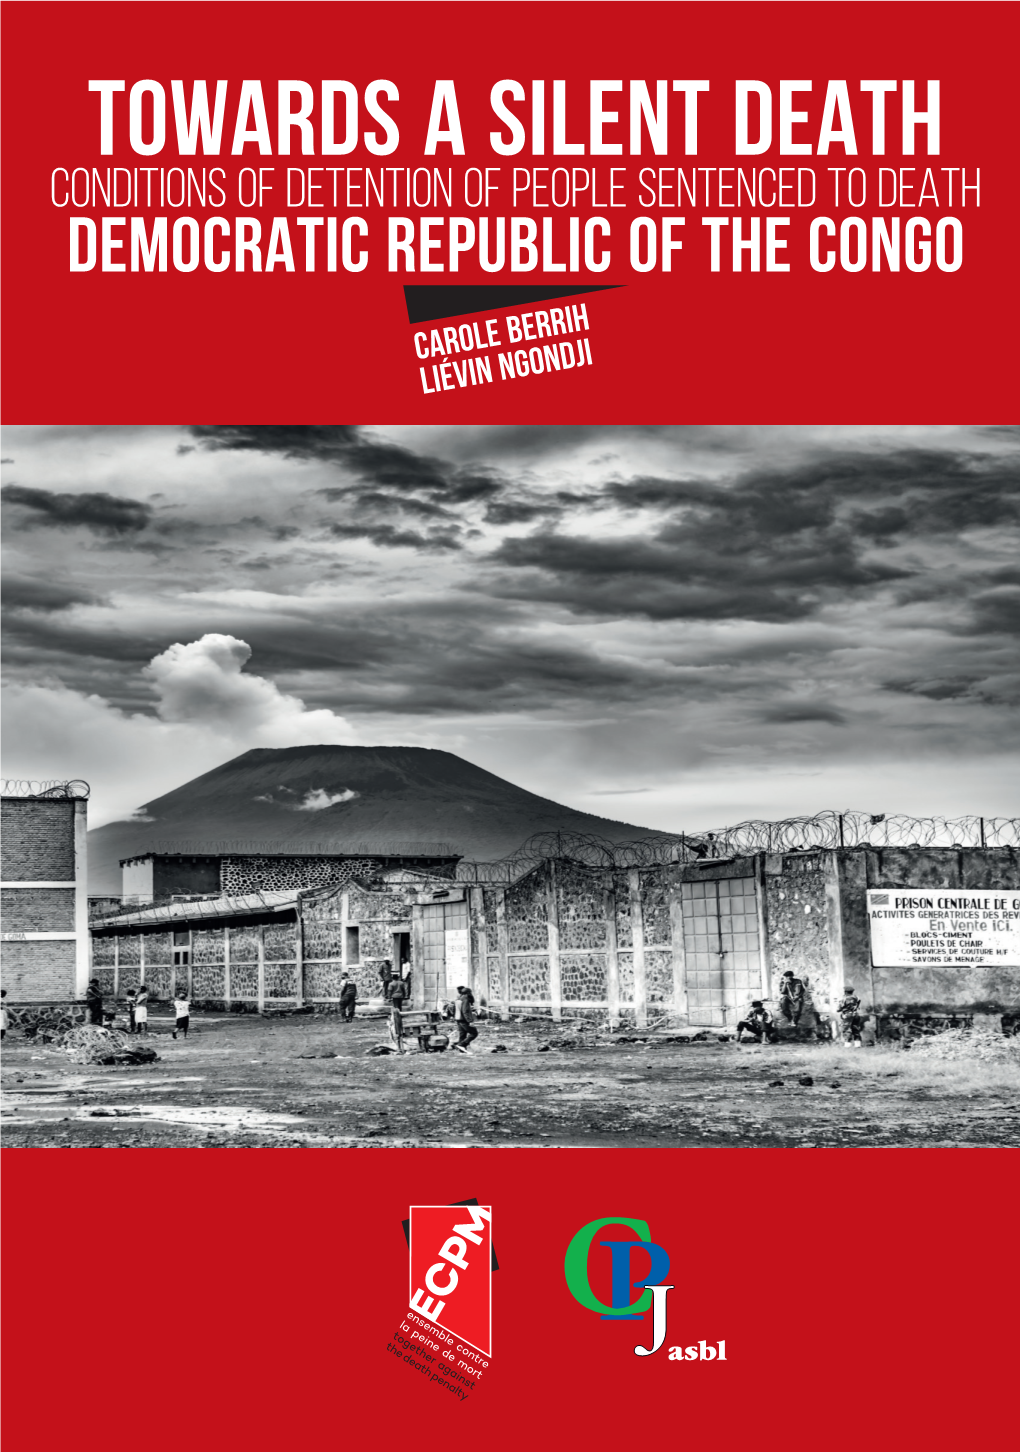 Abolition of the Death Penalty in the Draft Congolese Criminal Code, Suggesting Major Developments in This Direction